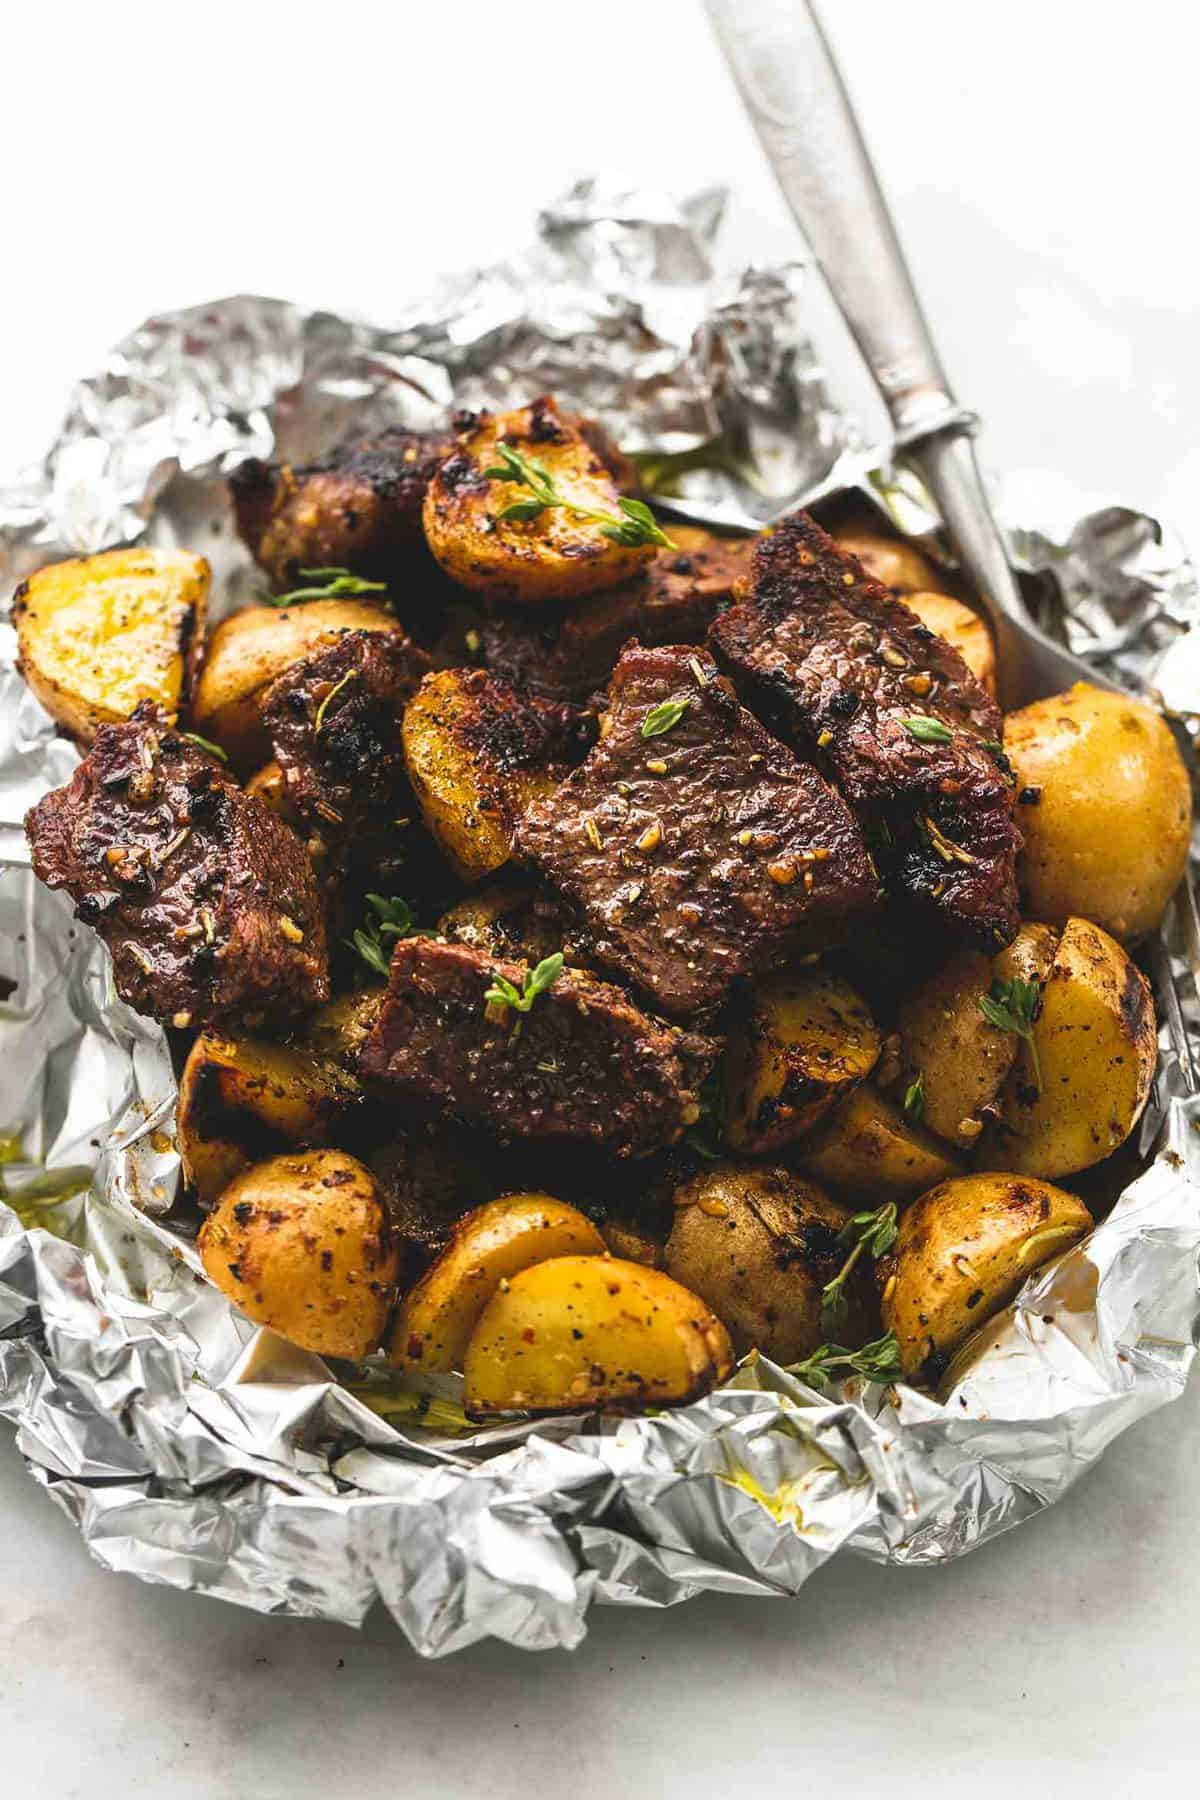 Garlic Steak And Potato Foil Packs | Easy Foil-Wrapped Camping Recipes For Outdoor Meals